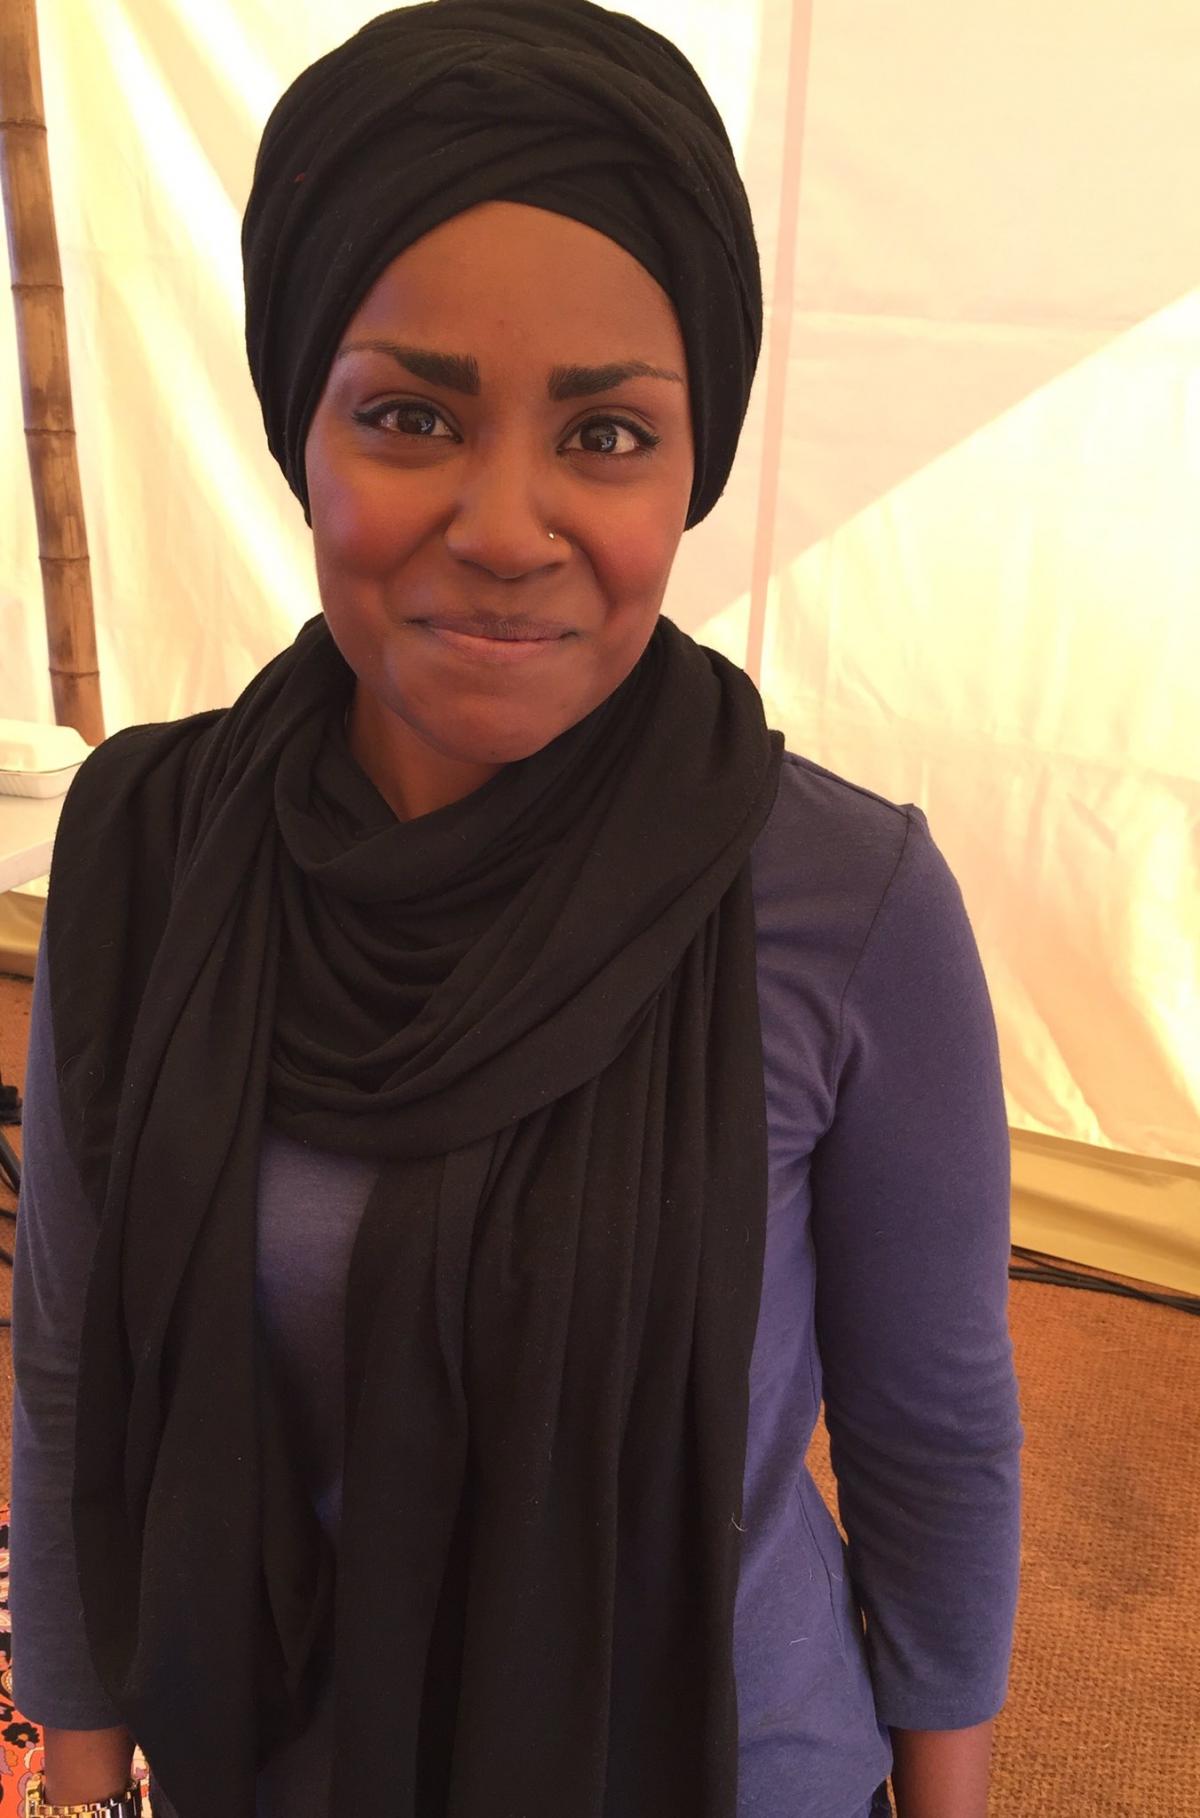 Nadiya Hussain, winner of the latest series of the Great British Bake Off, was at the Big Feastival to give a talk. Organisers posted this snap online, writing: We love you @BegumNadiya fantastic talk at #TheBigFeastival #GBBO. Picture: Twitter